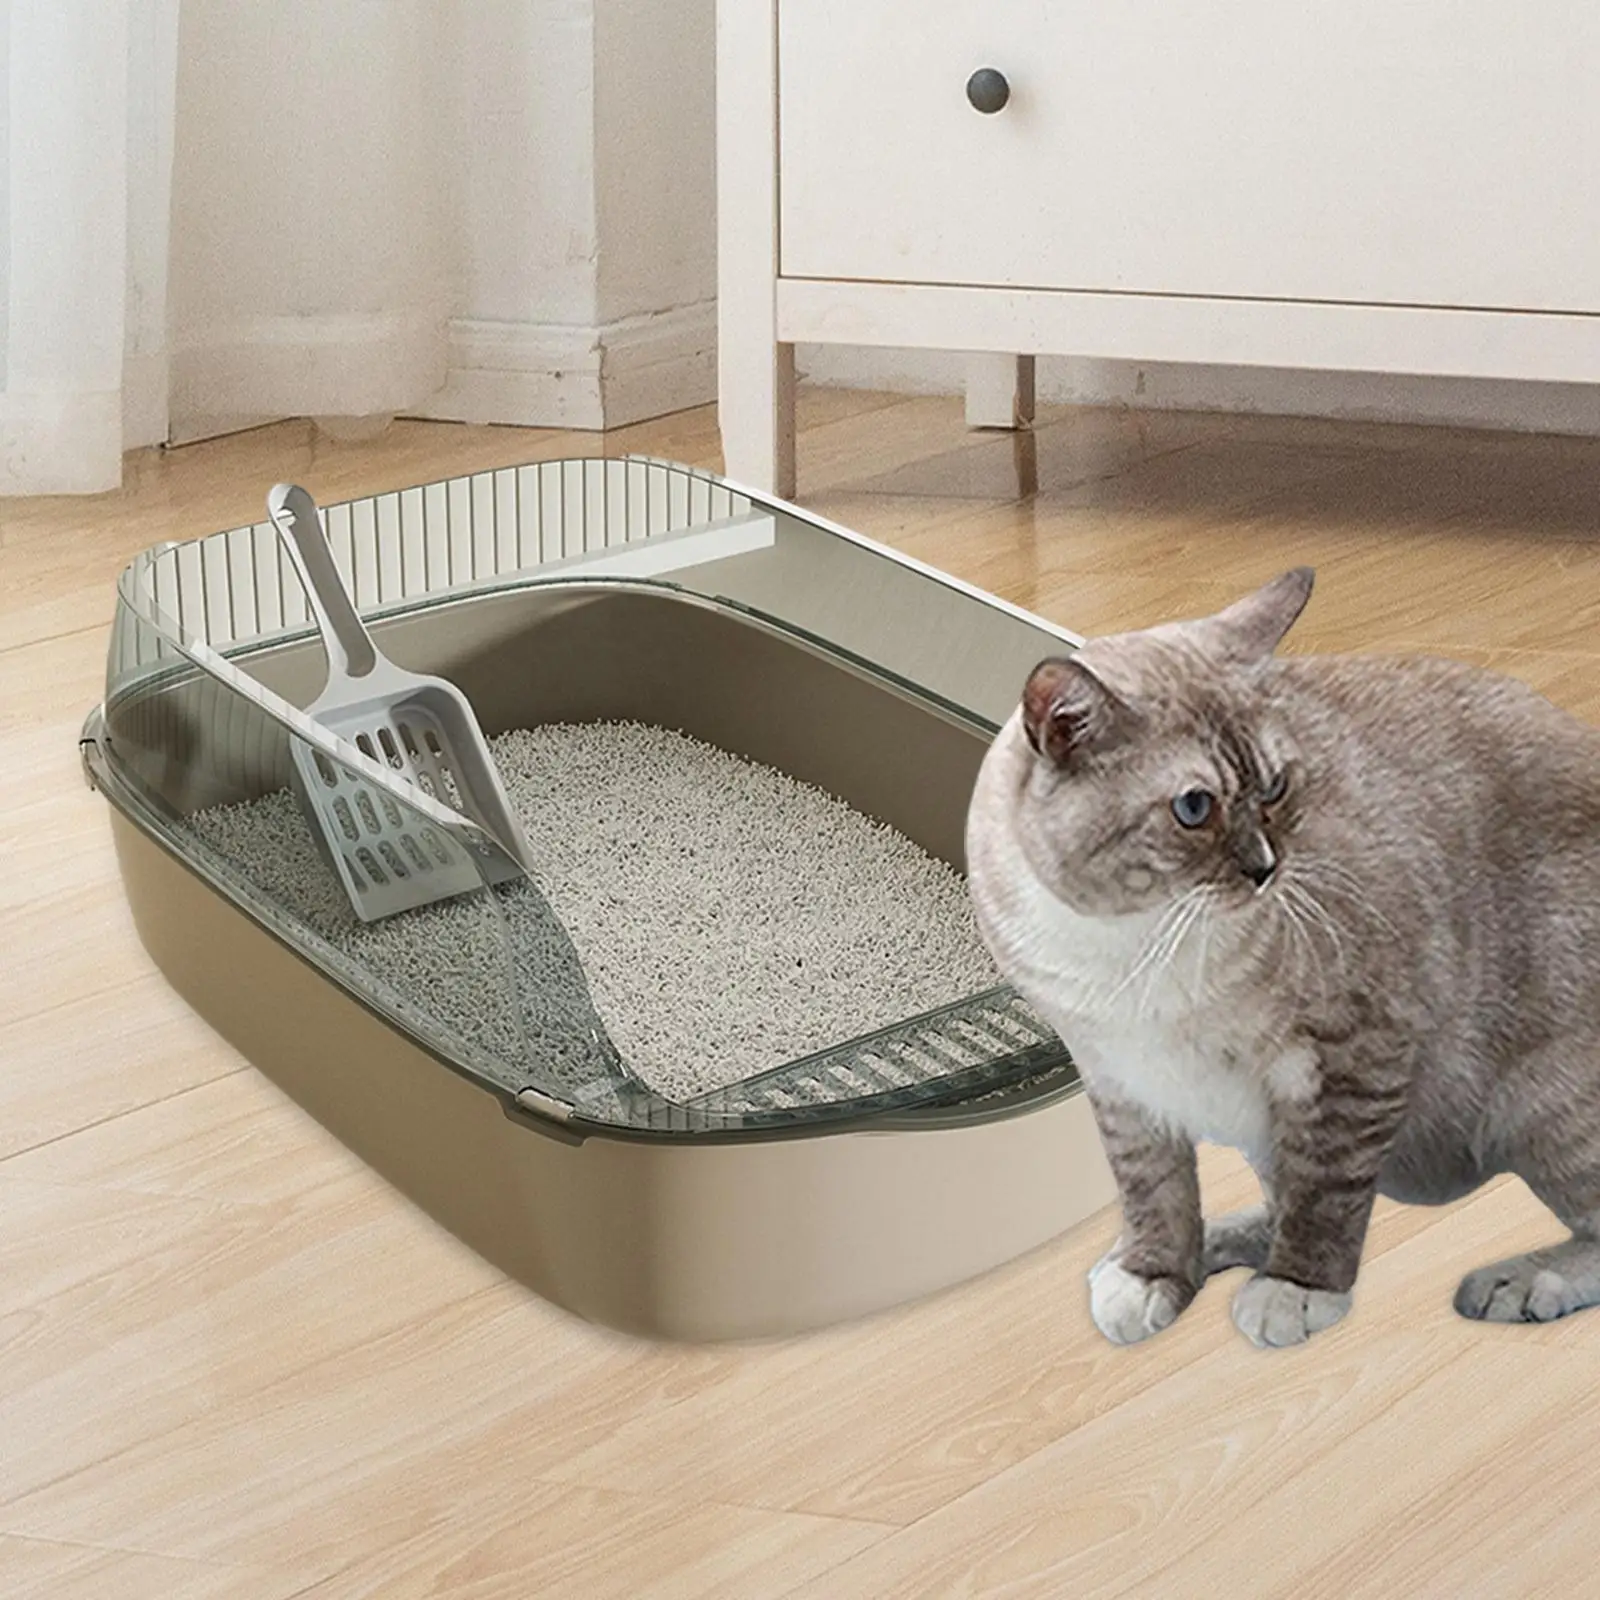 Pets Litter Trays Bedpan Easy to Clean Cats Litter Box Potty Toilet for Hamsters Small and Medium Cats Kitten Small Animal Bunny